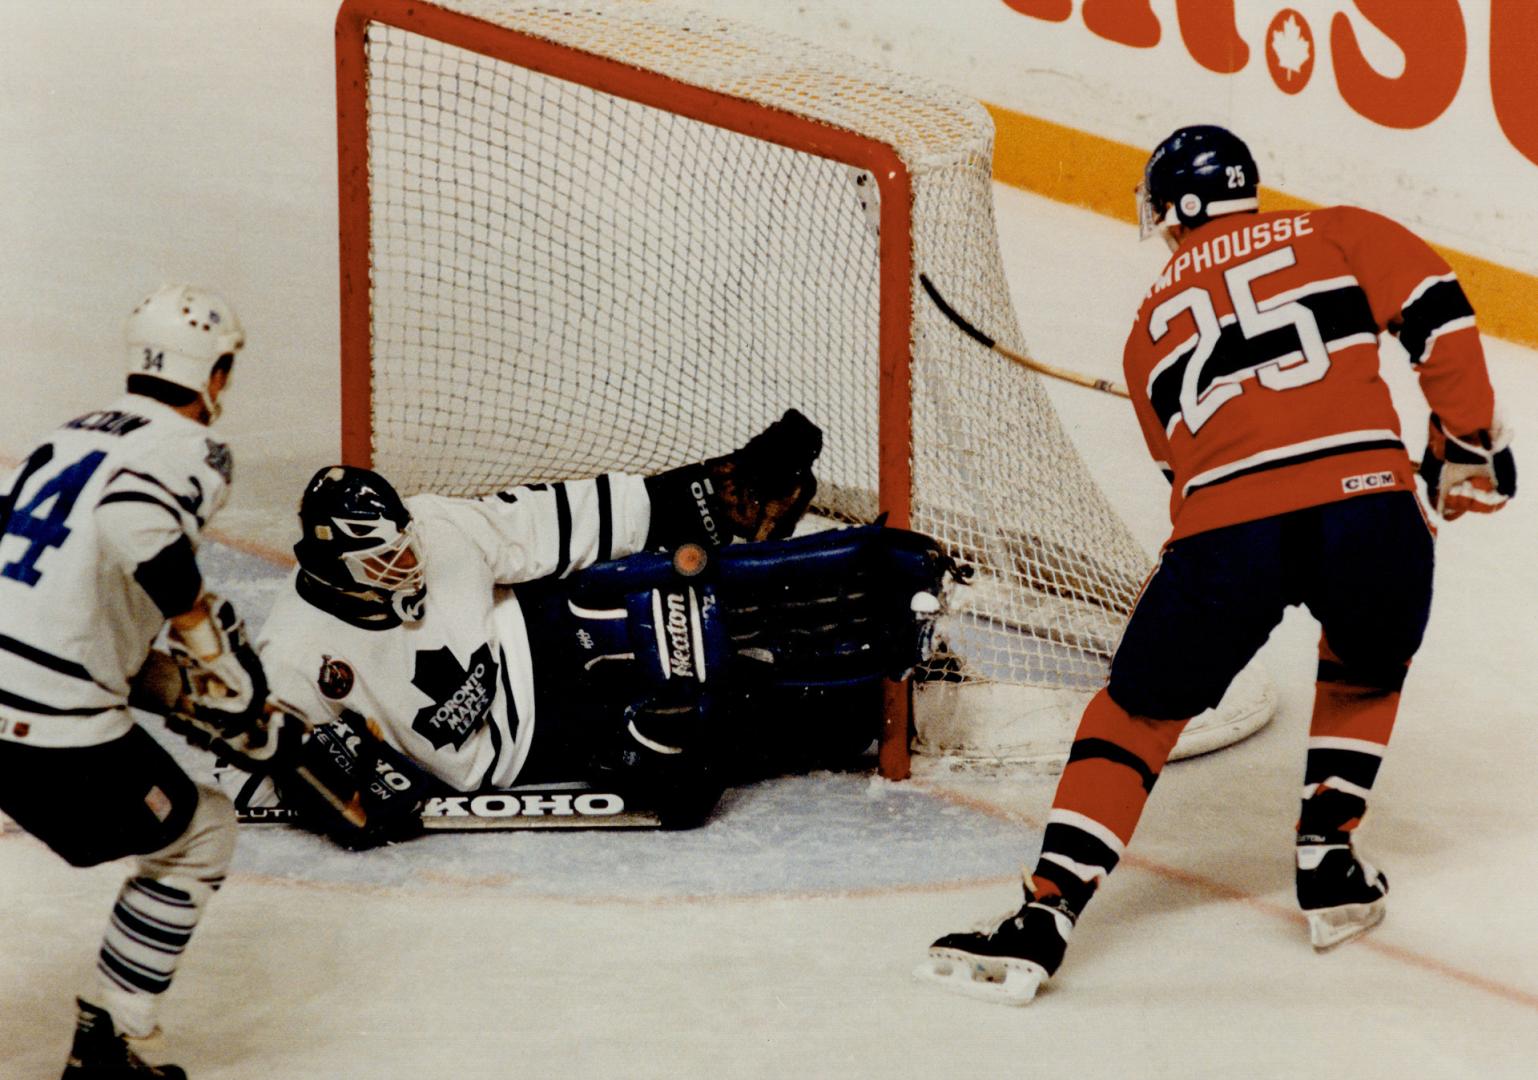 Pouncing on Pucks, With cat-like reflexes, Leafs goalle Felix Potvin has compiled the finest goals against average in the National Hockey League. Not bad for a rookie